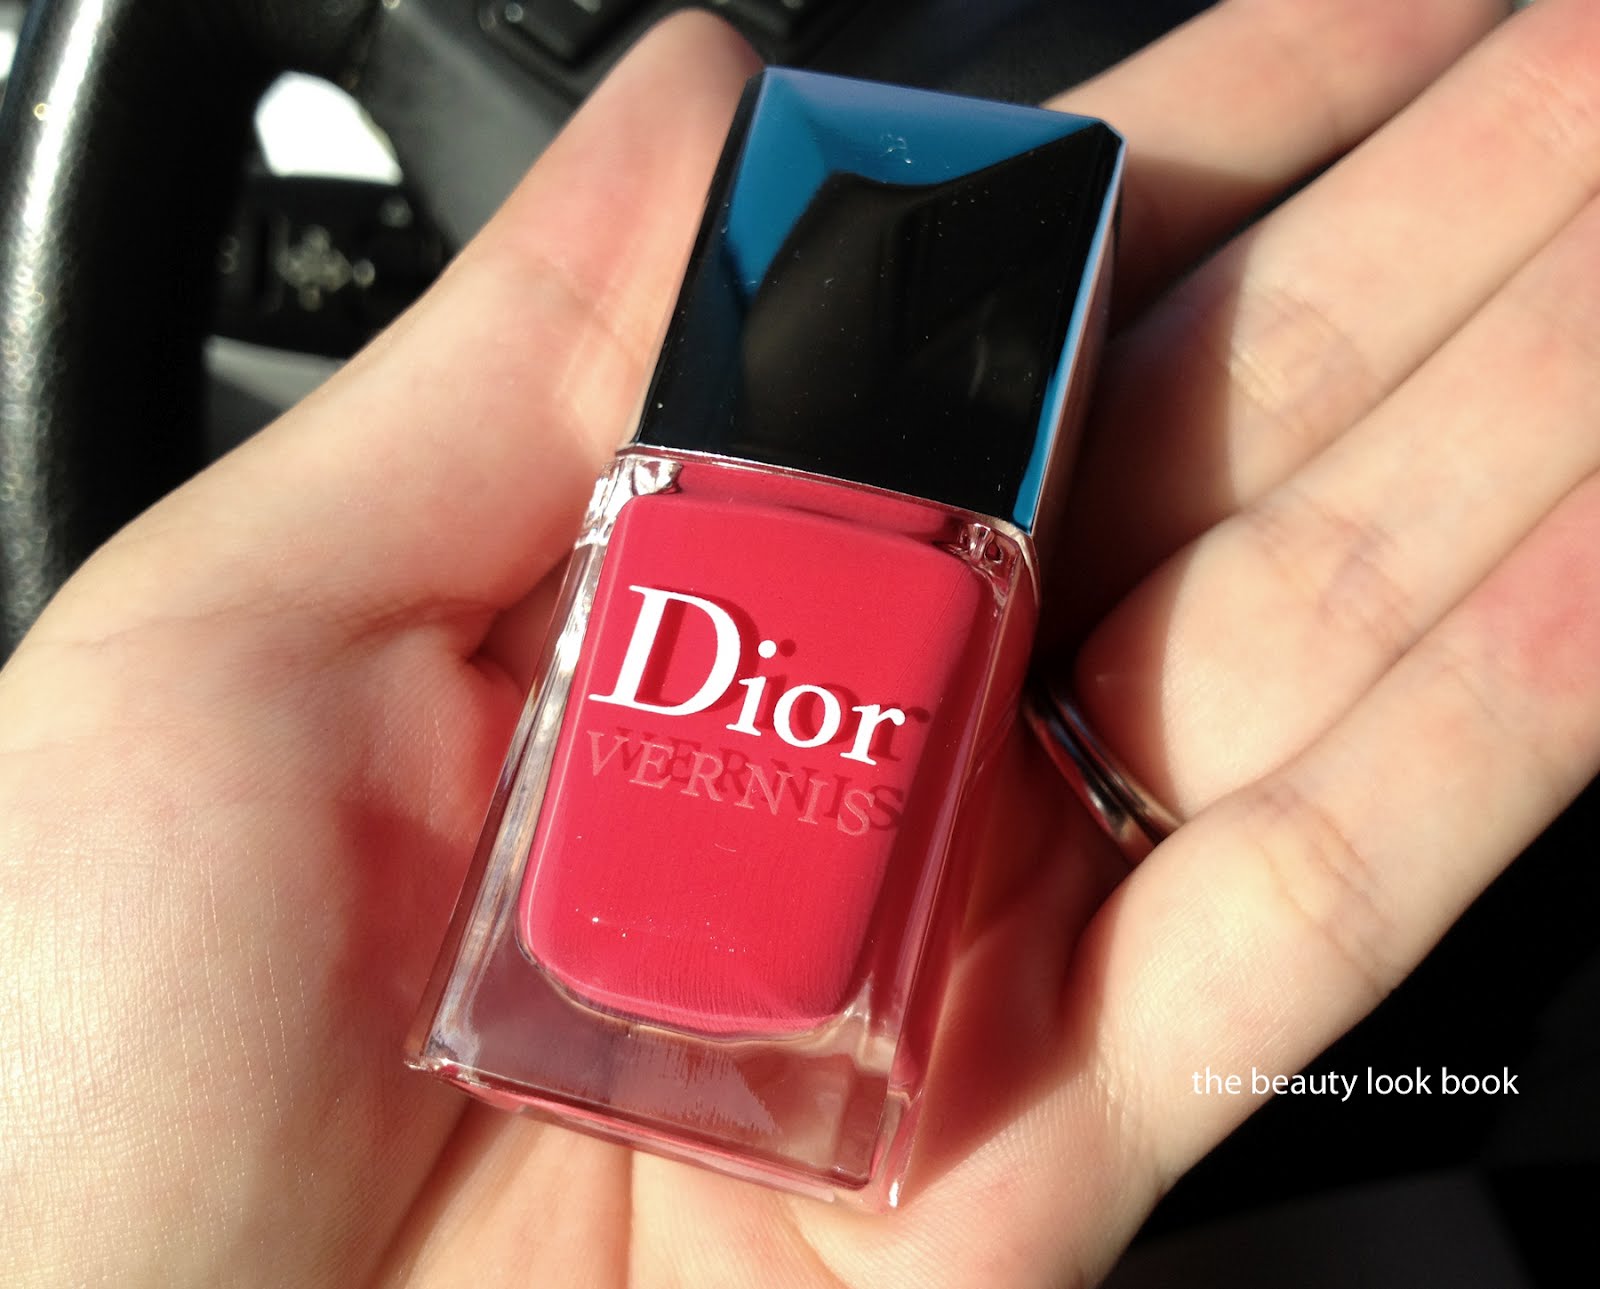 1. Dior Vernis Nail Polish in "Lucky" - wide 10